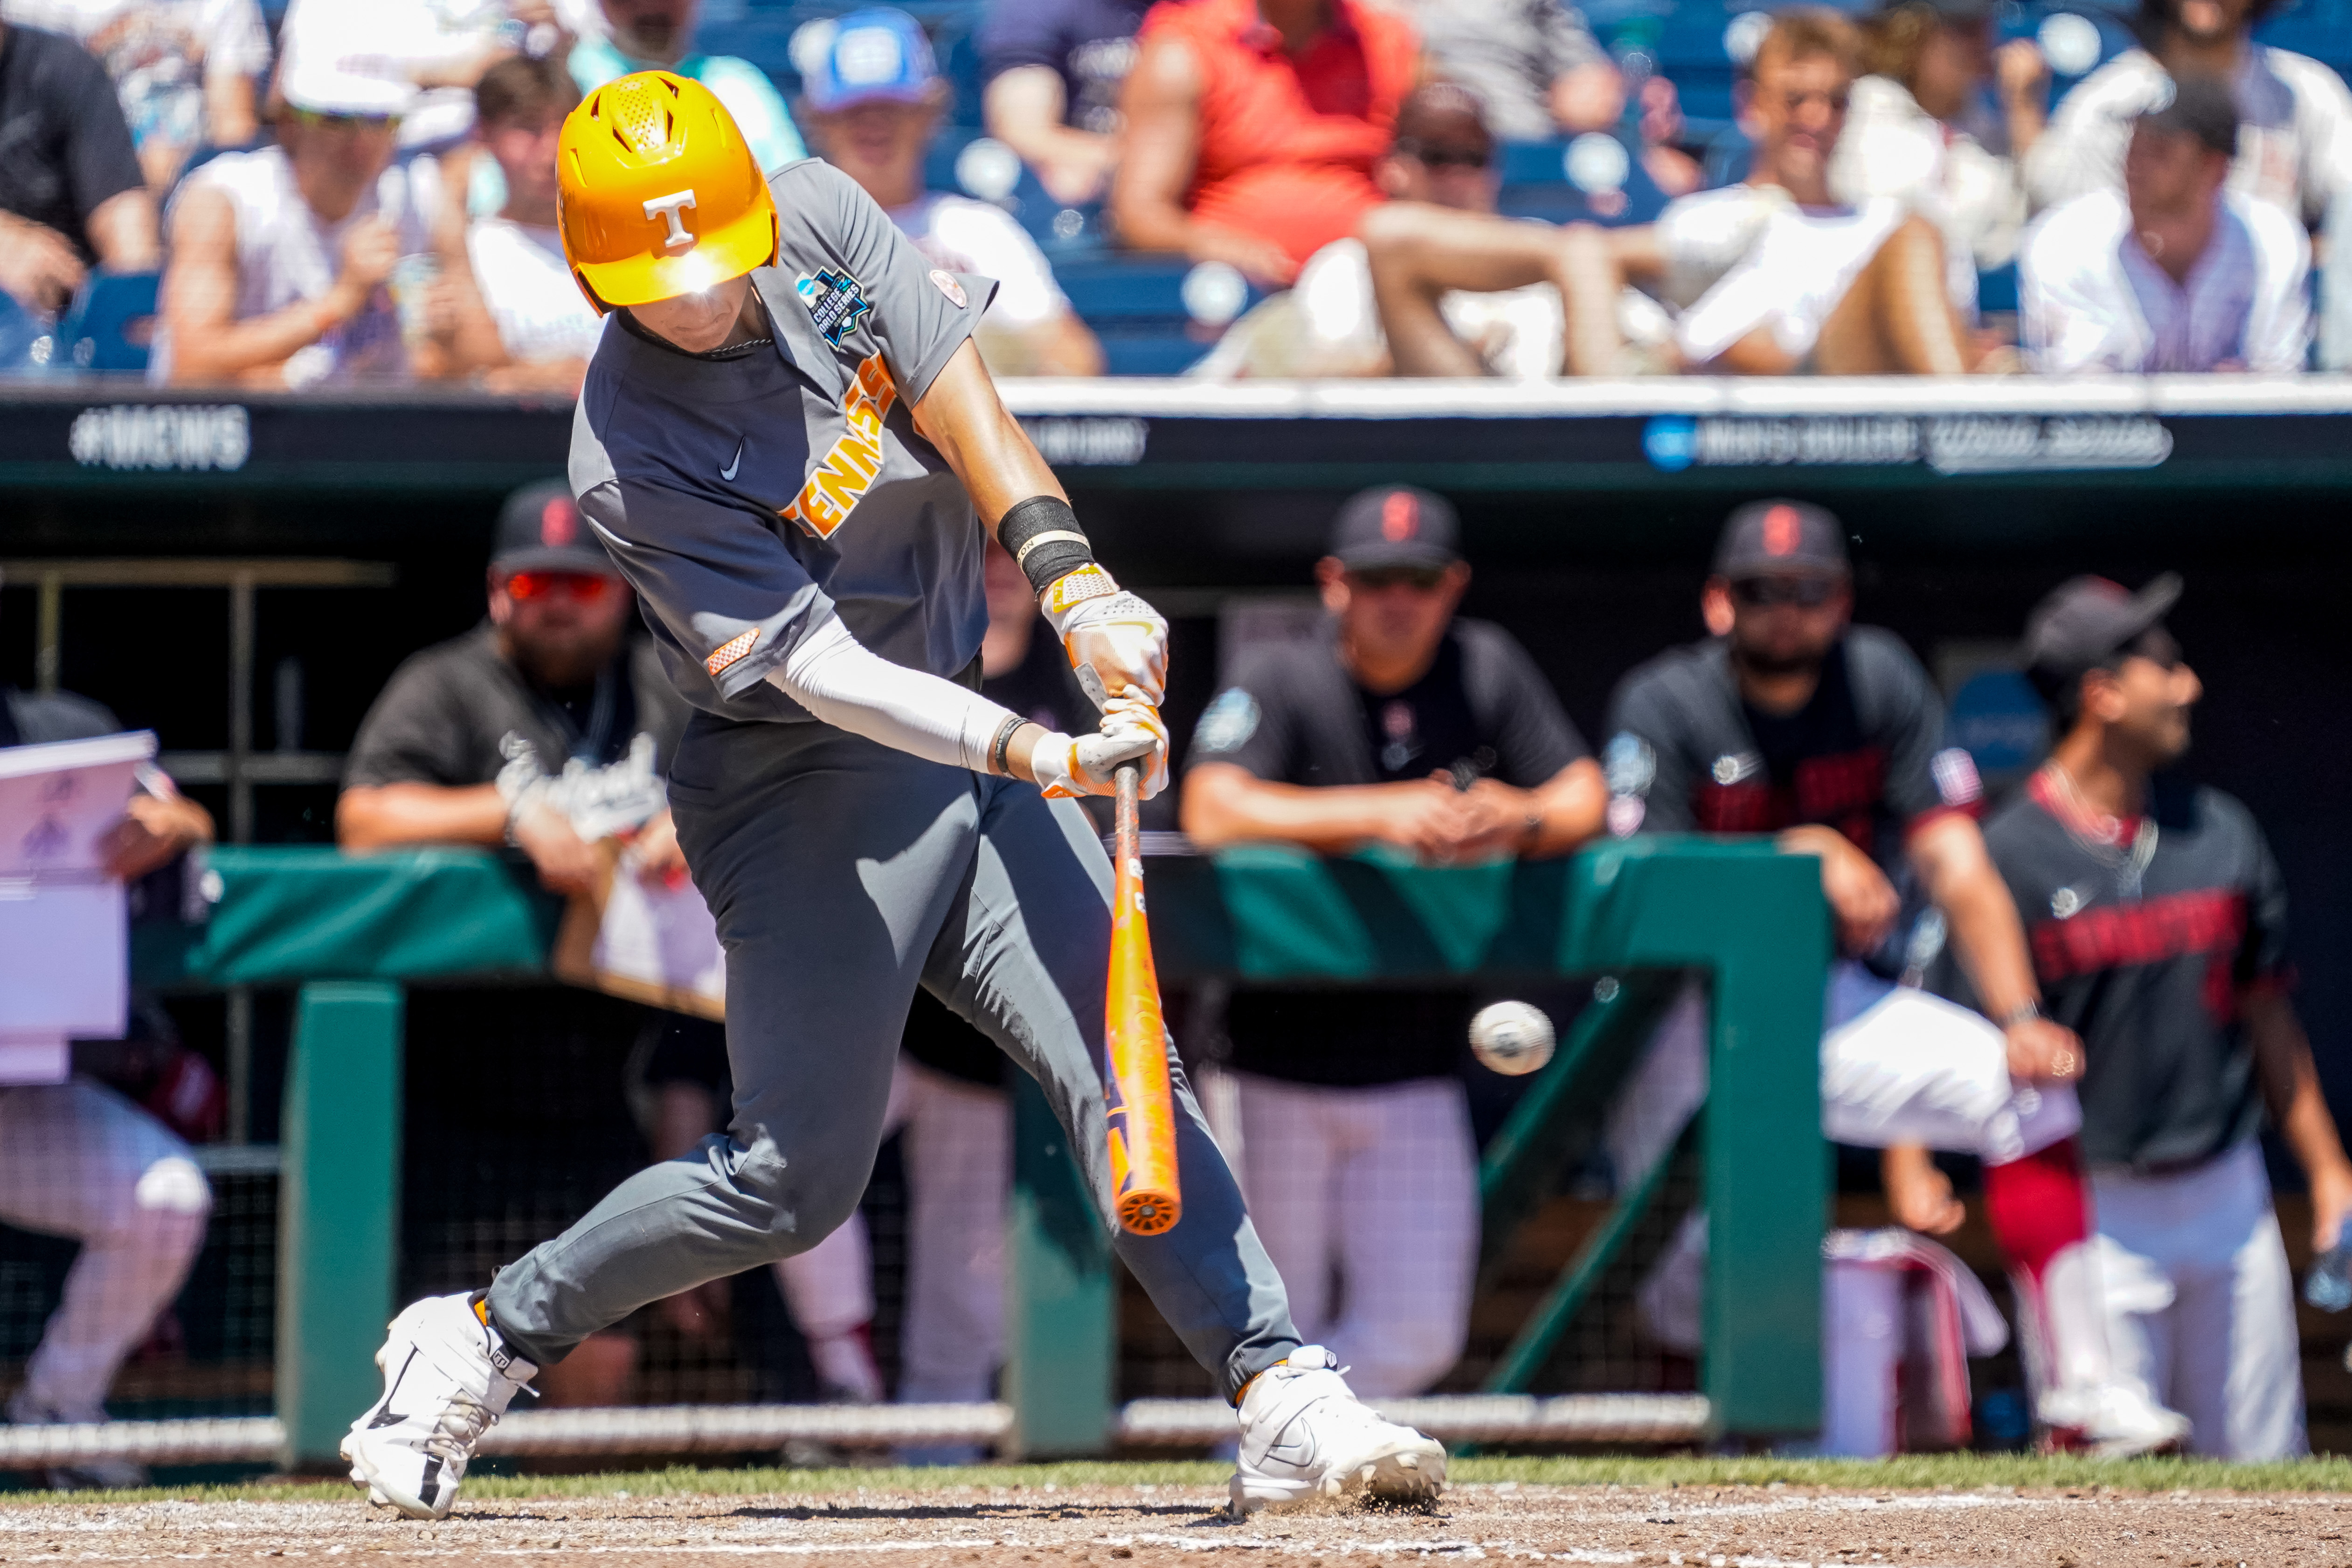 NCAA Baseball: College World Series-Stanford vs Tennessee